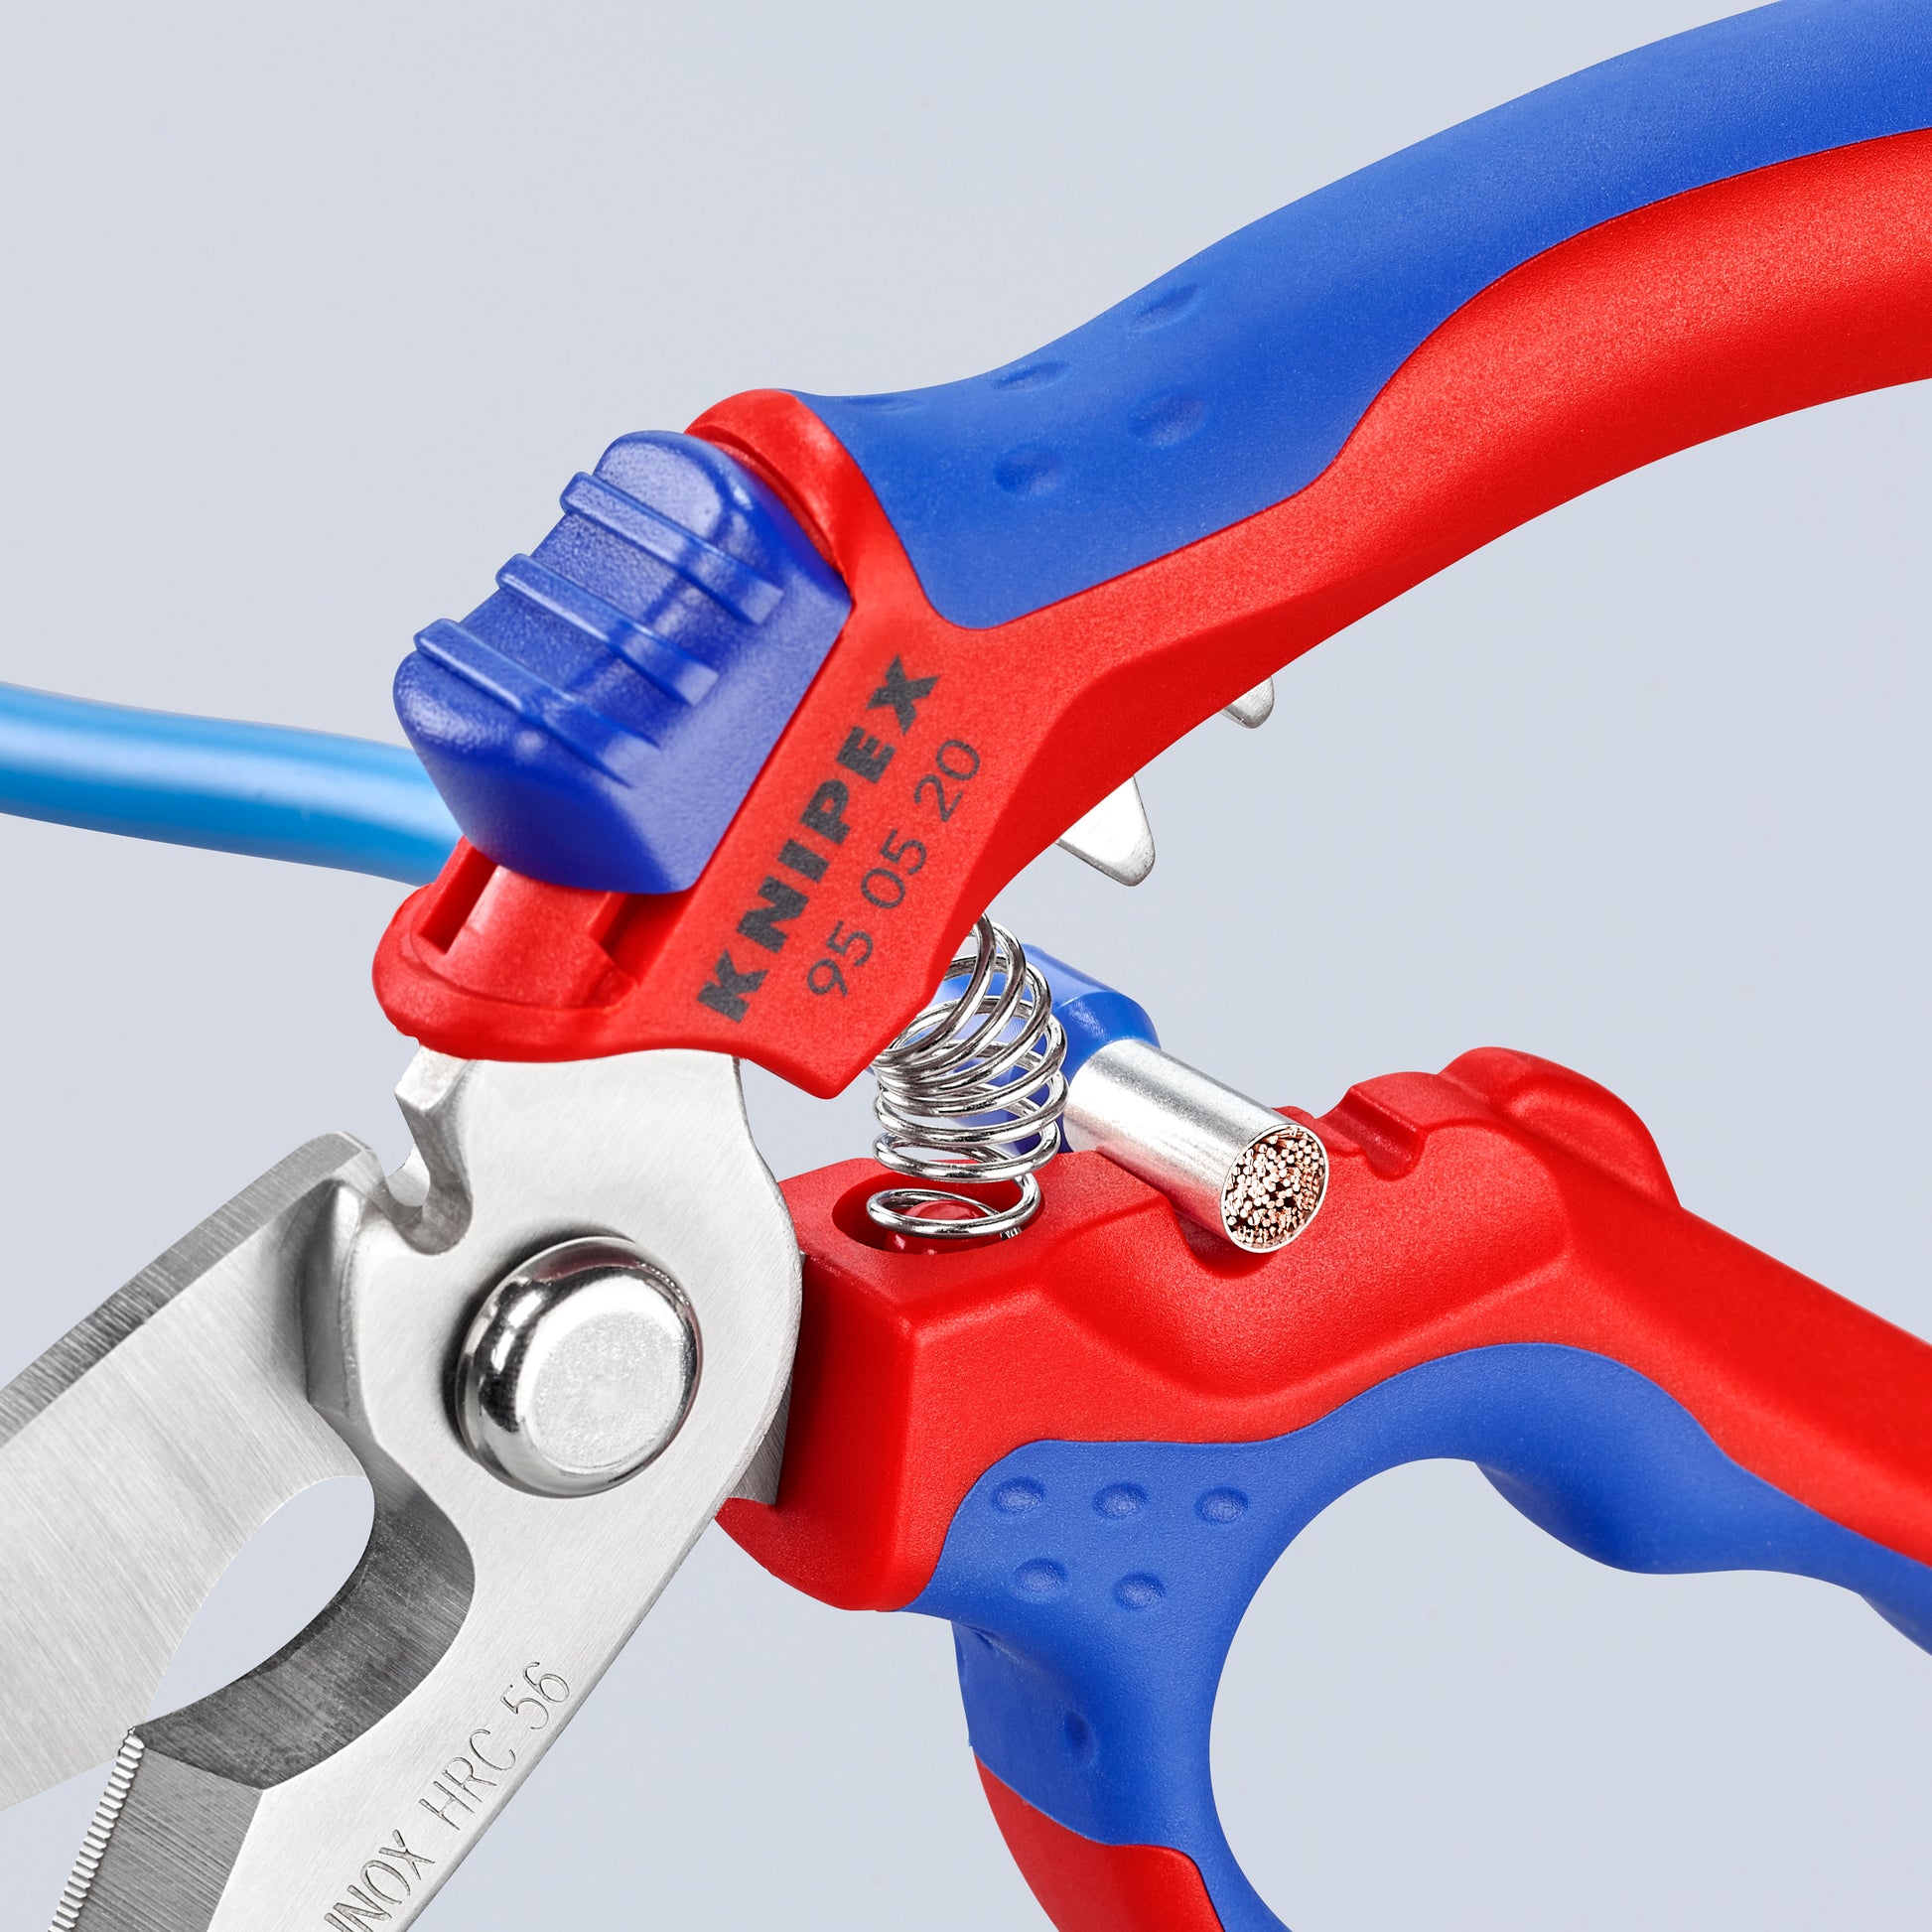 Knipex Electricians Shears: The smoothest, cleanest cutters yet